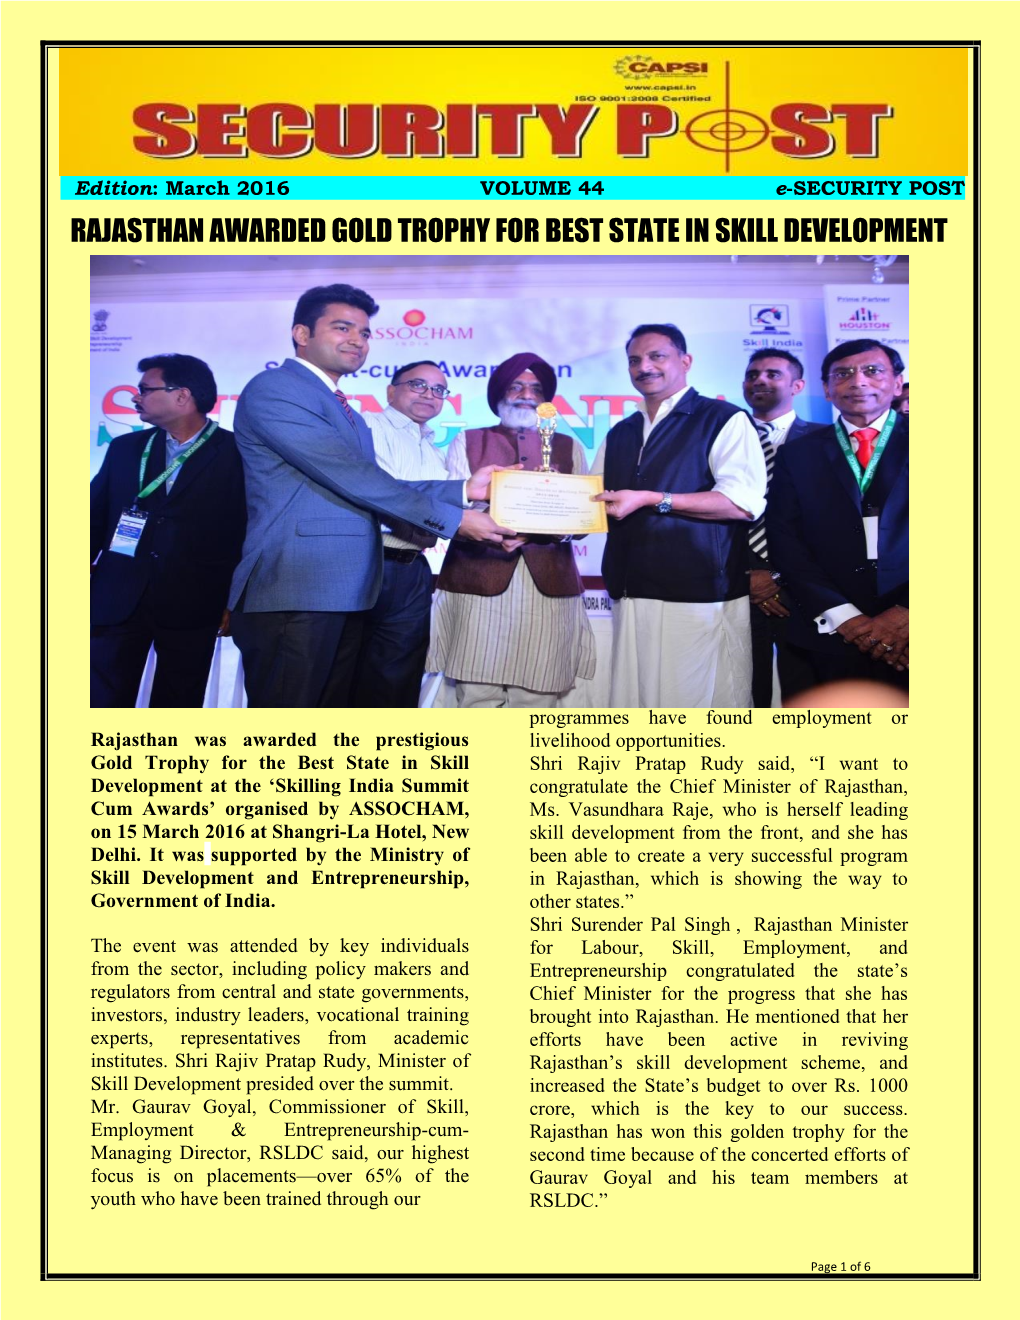 Rajasthan Awarded Gold Trophy for Best State in Skill Development